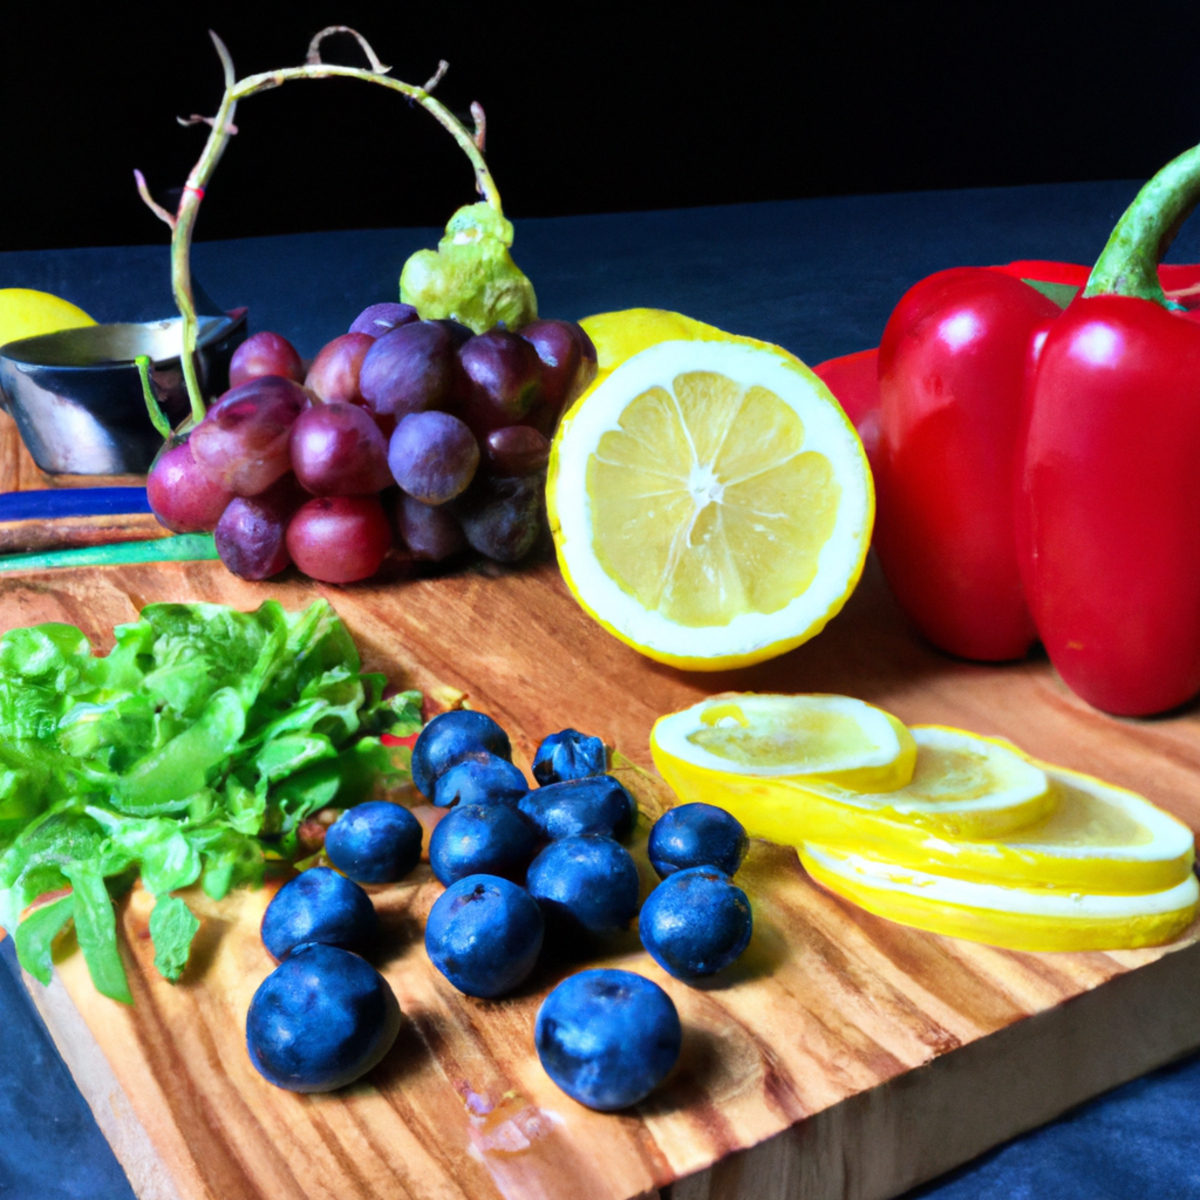 The photo shows a wooden cutting board with various colorful fruits and vegetables arranged in an artful manner. A bright yellow lemon is sliced in half, revealing its juicy interior, while a vibrant red bell pepper is sliced into thin strips. A bunch of green grapes and a handful of blueberries add pops of color to the scene. In the background, a glass jar filled with quinoa and a small bowl of mixed nuts can be seen, emphasizing the importance of incorporating whole grains and healthy fats into one's diet for stress and anxiety management. The overall composition of the photo exudes a sense of freshness and vitality, inviting the viewer to consider the benefits of functional foods for their mental health.